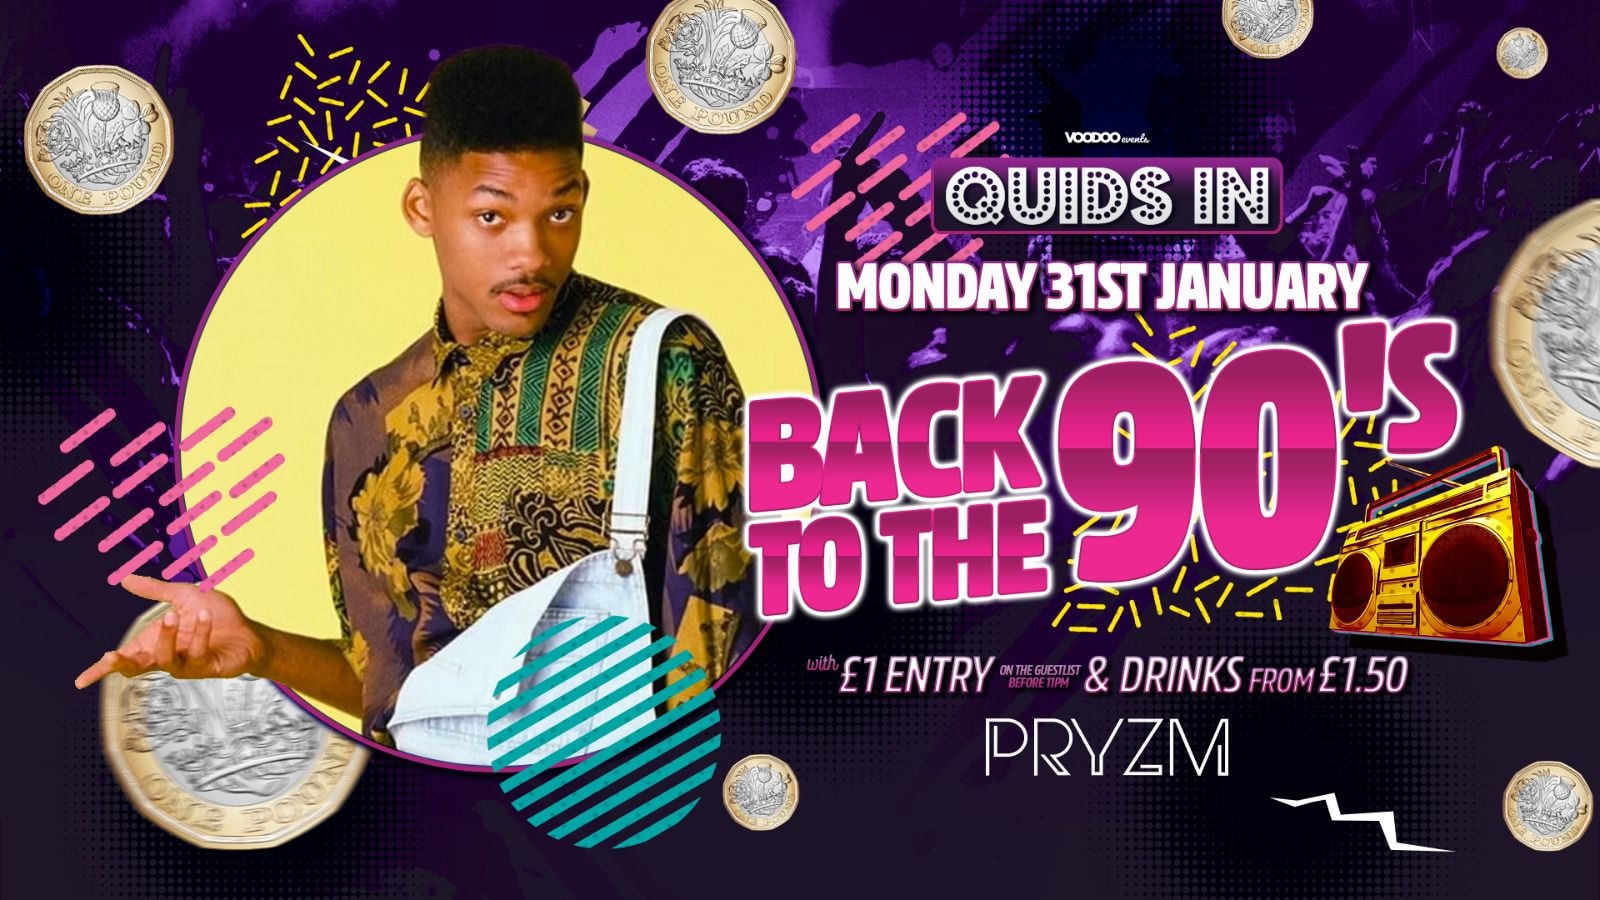 Quids In Mondays – Back to the 90’s -31st January